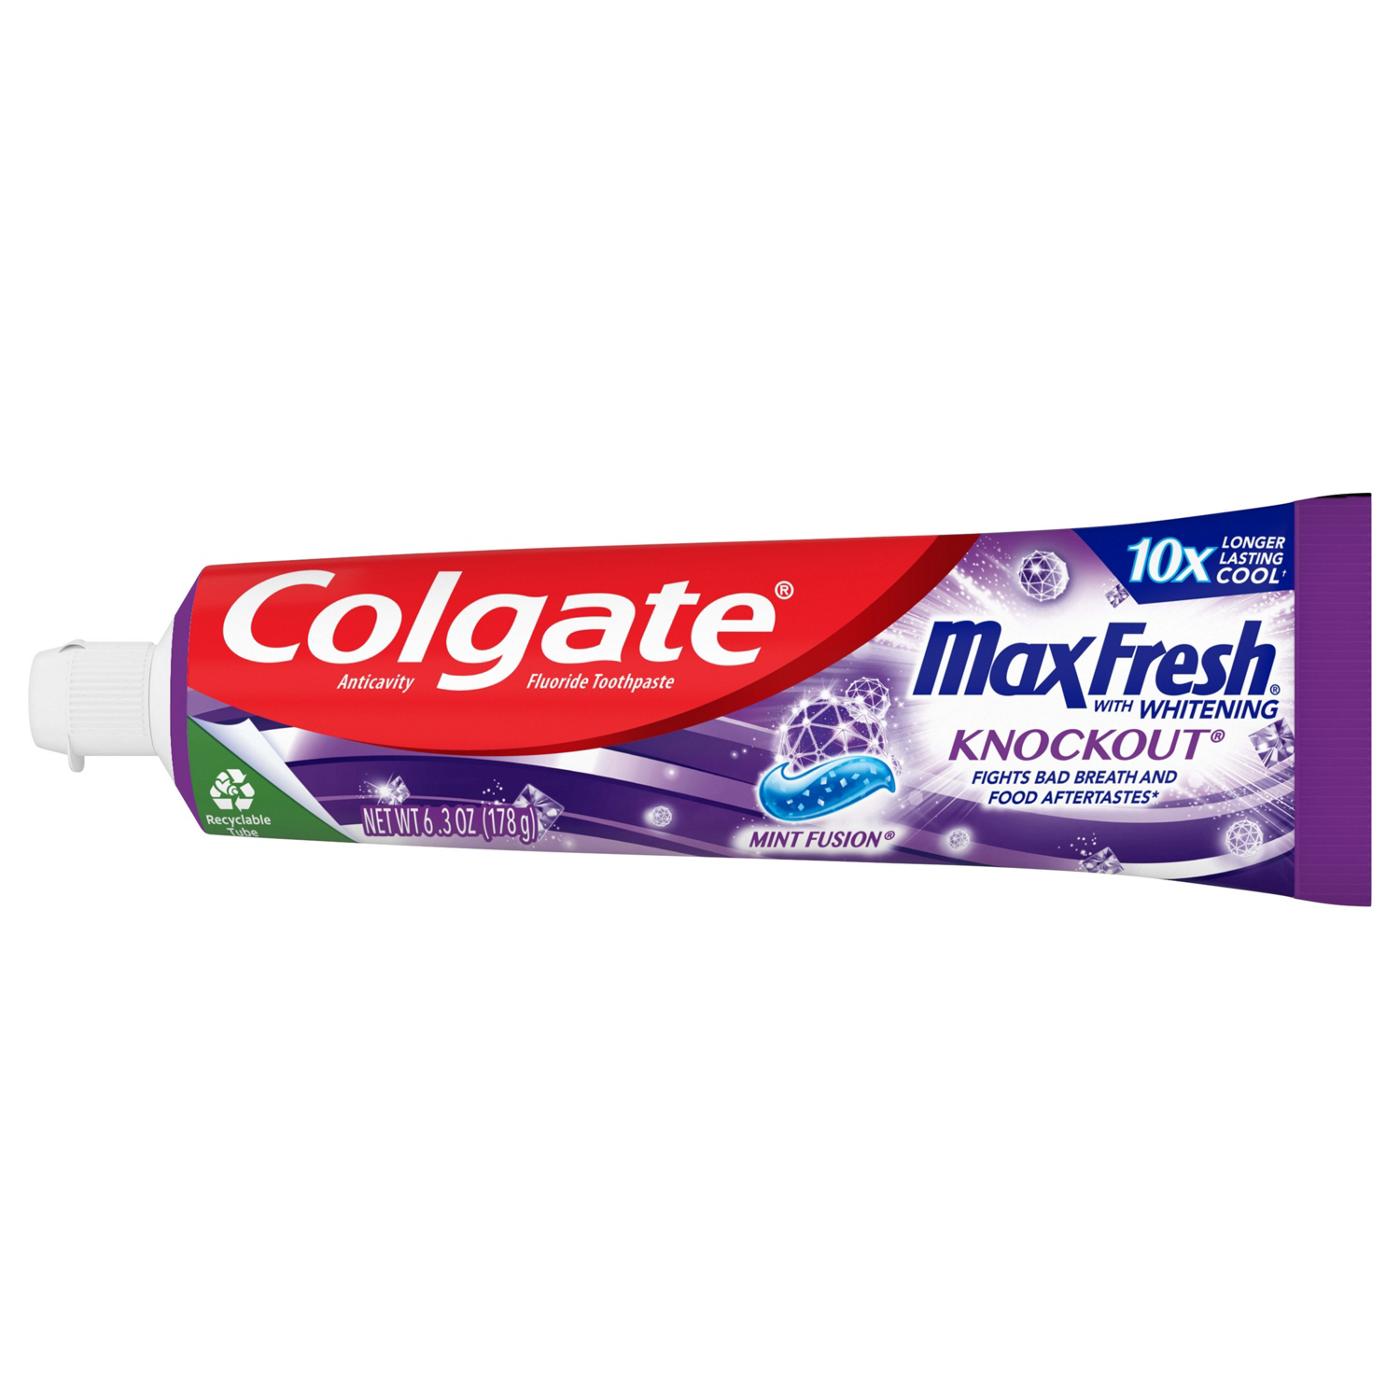 Colgate Max Fresh Anticavity Toothpaste - Mint Fusion; image 4 of 16